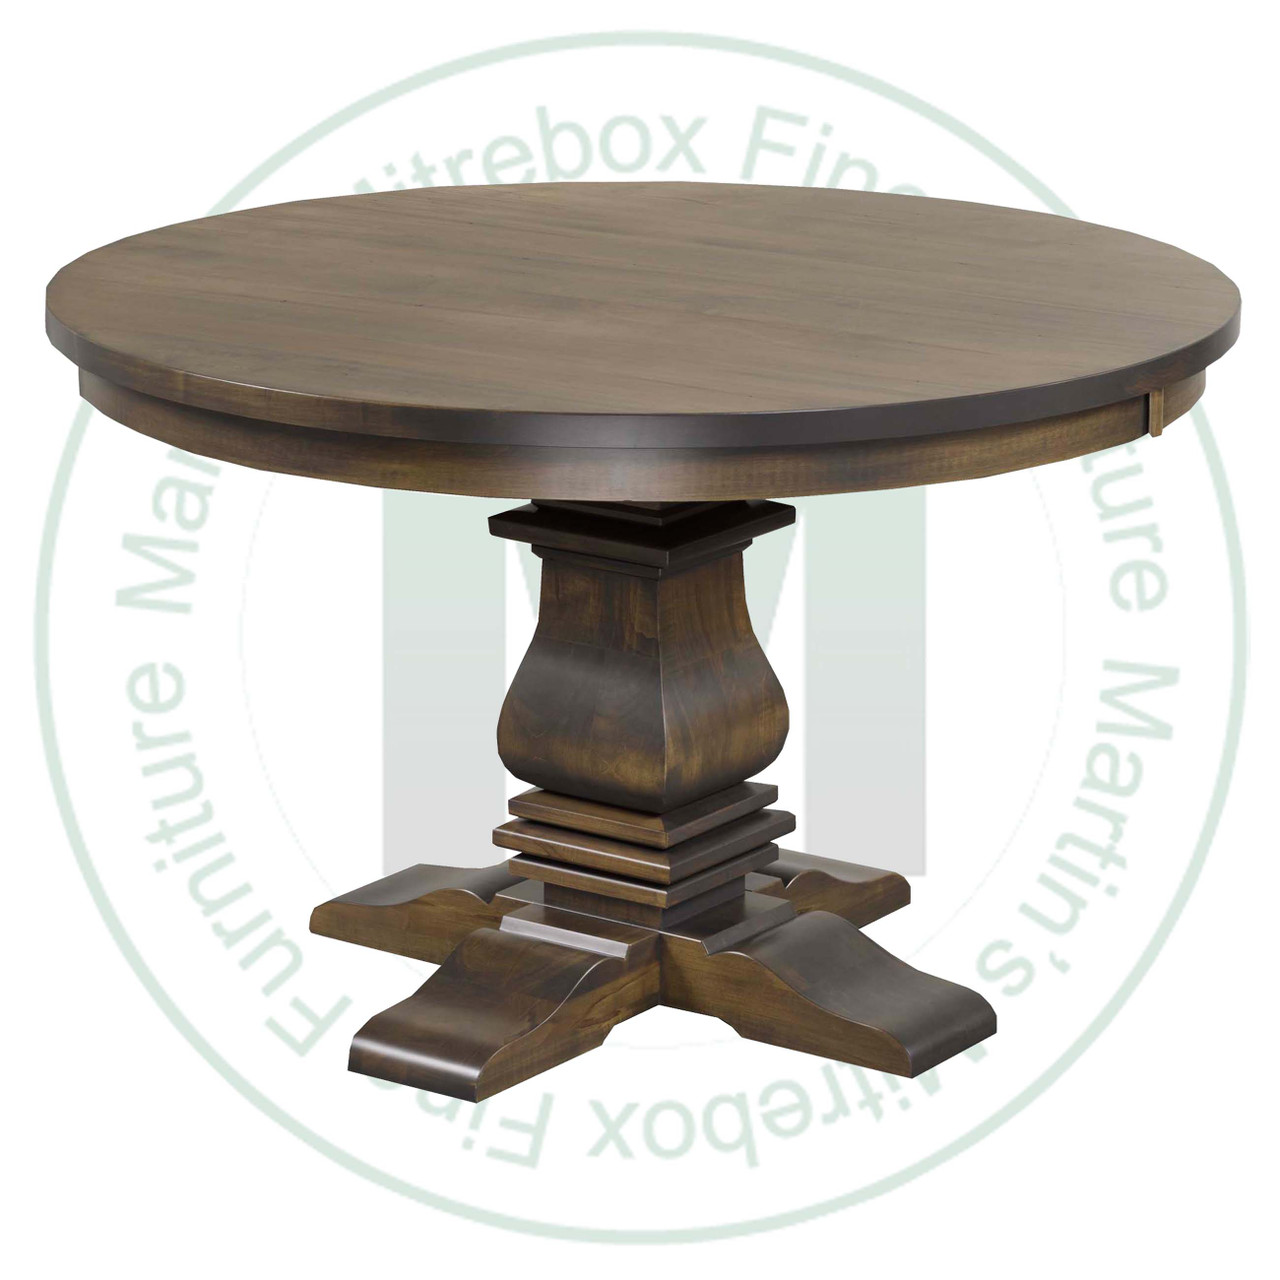 Oak Spartan Collection Single Pedestal Table 42''D x 48''W x 30''H With 2 - 12'' Leaves. Table Has 1.25'' Thick Top